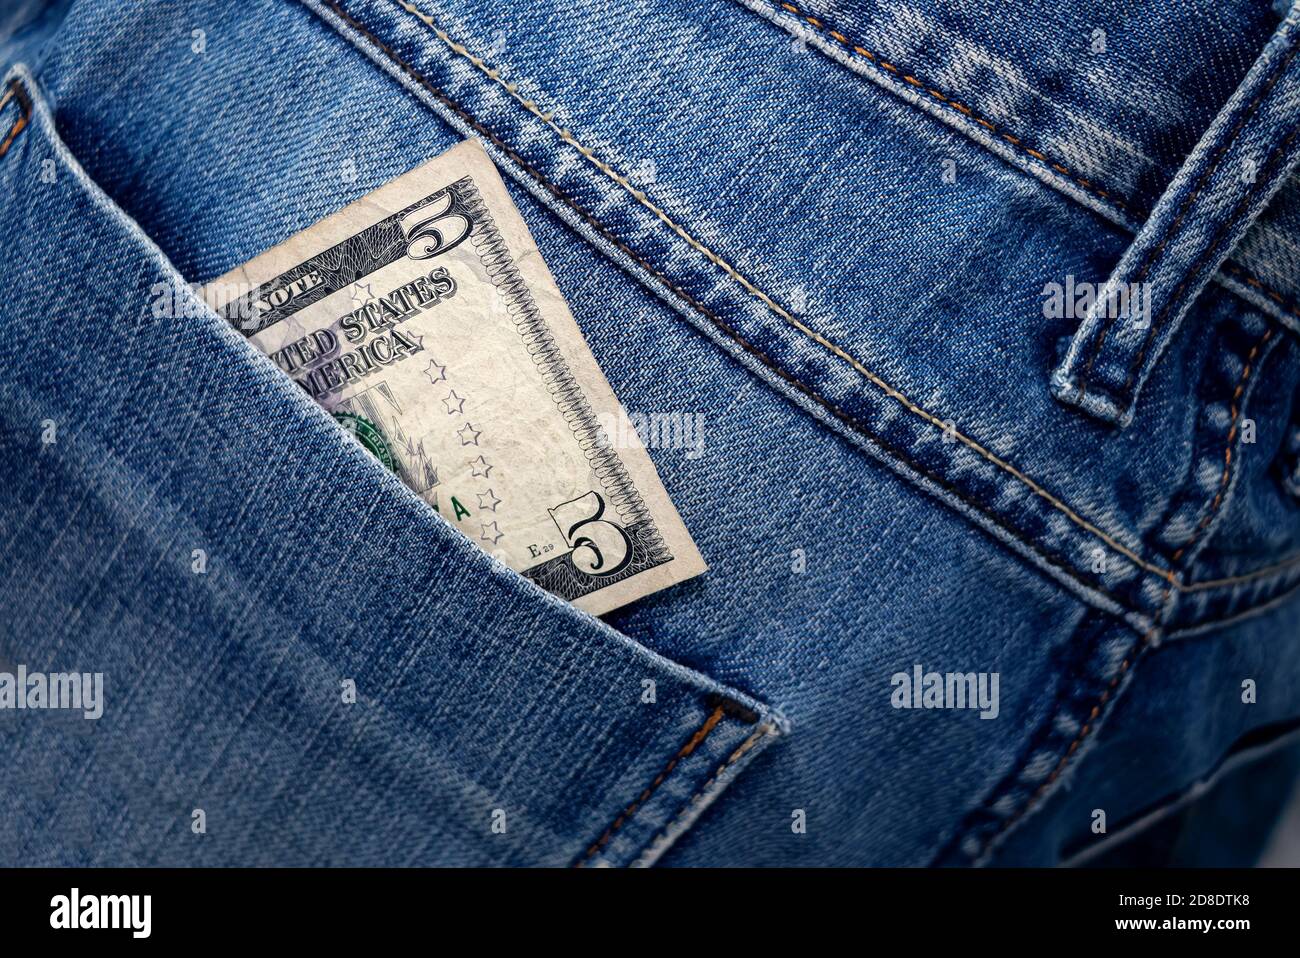 Dollar bill in the back pocket of jeans. Five bucks in a denim pocket. Close-up Stock Photo